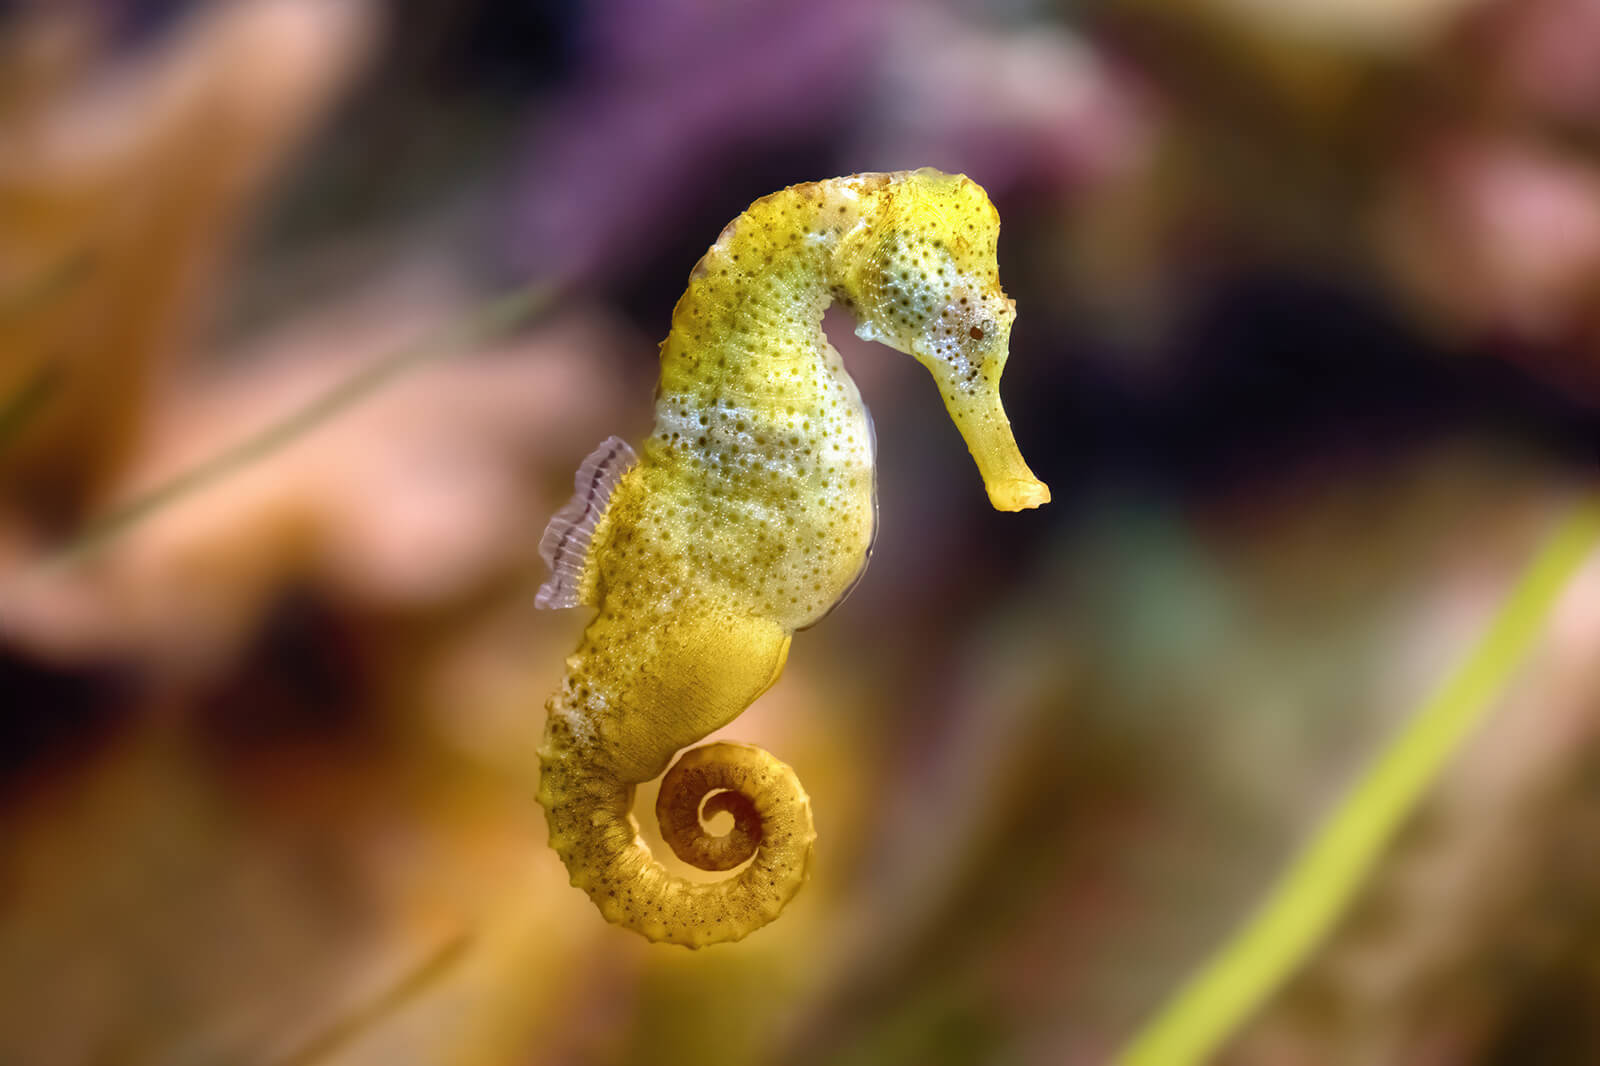 This Animal Quiz Might Not Be Hardest 1 You've Ever Taken, But It Certainly Isn't Easy Seahorse